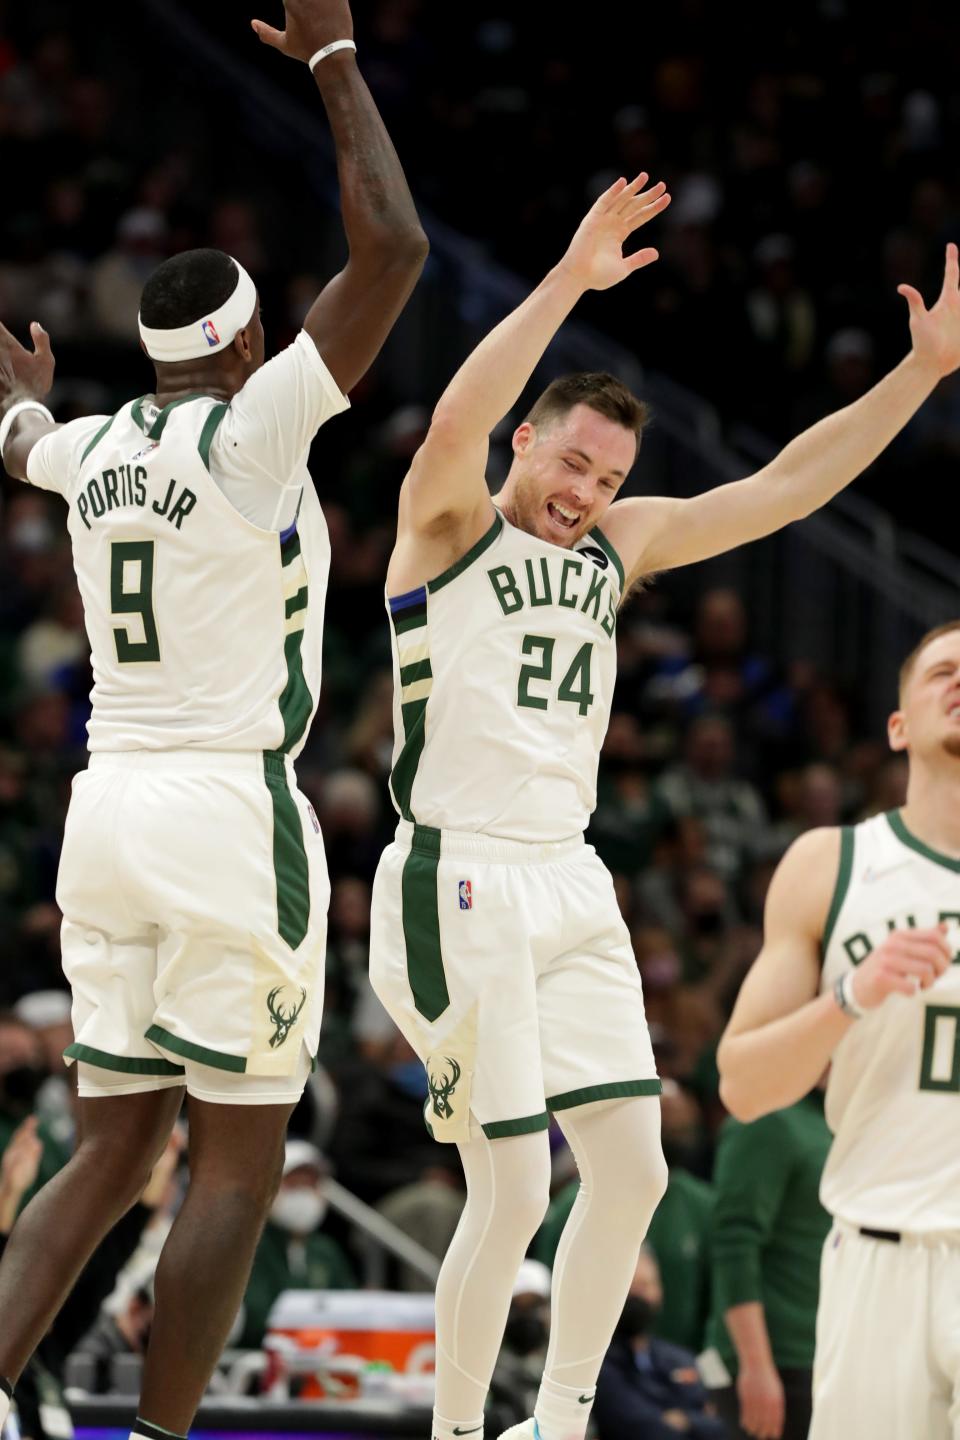 Pat Connaughton (24) and Bobby Portis (9) celebrated a lot of three pointers throughout the season. Connaughton shot 39.5% and Portis 39.3%.